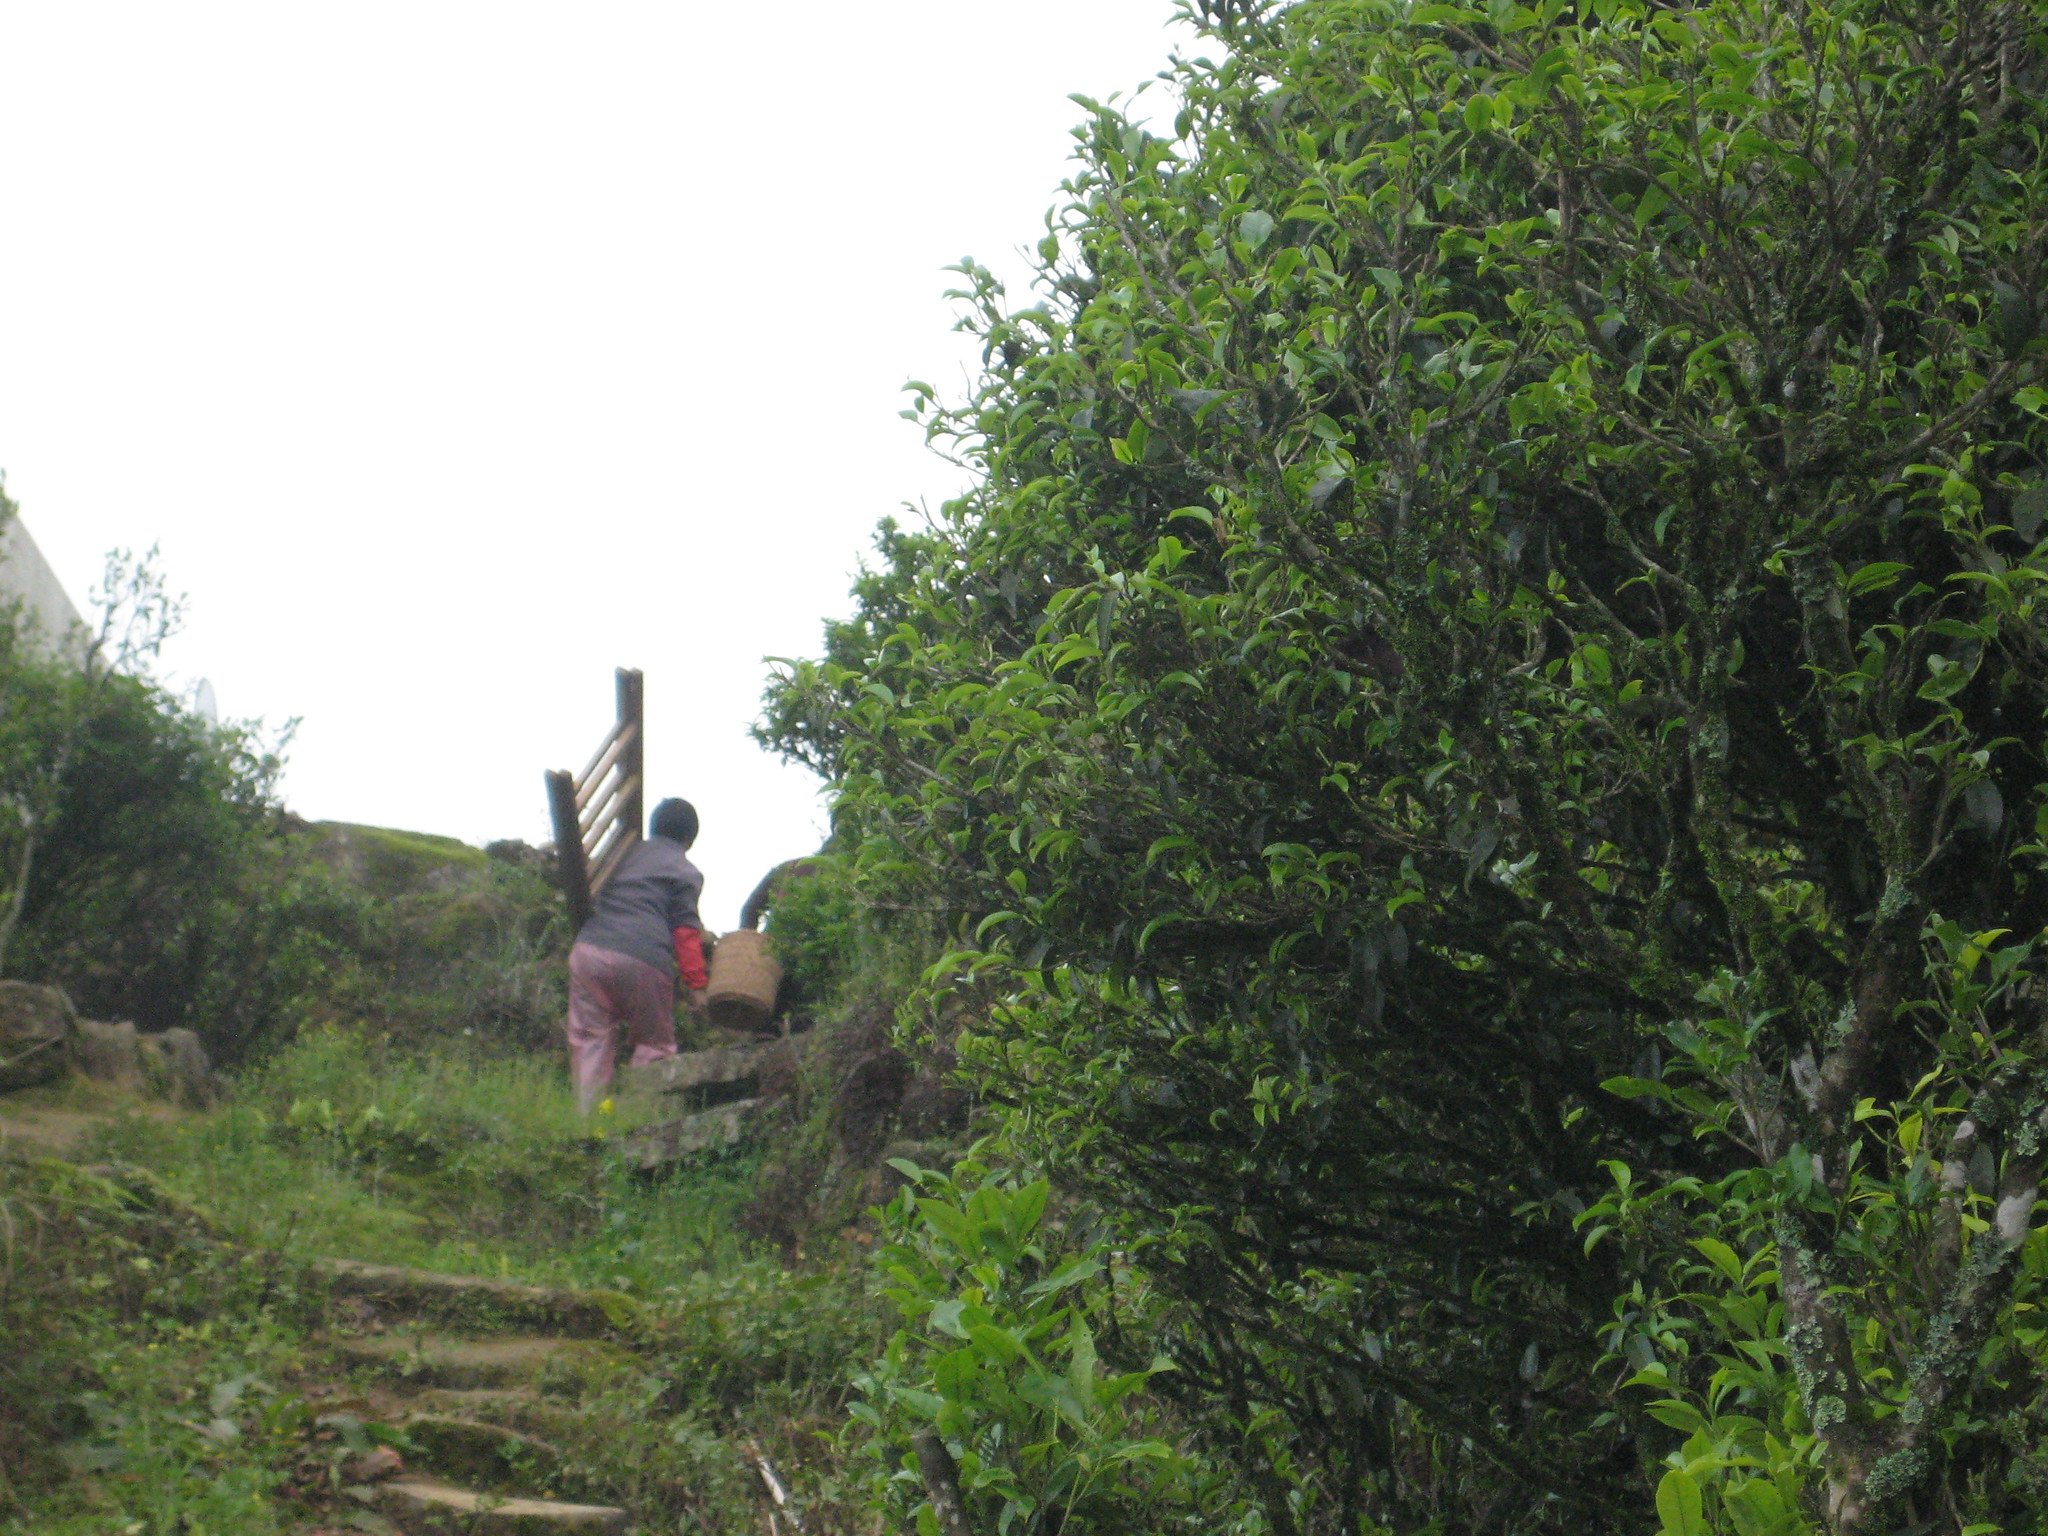 Tea Picker Carrying the Ladder She Used to Pick Tea Leaves With